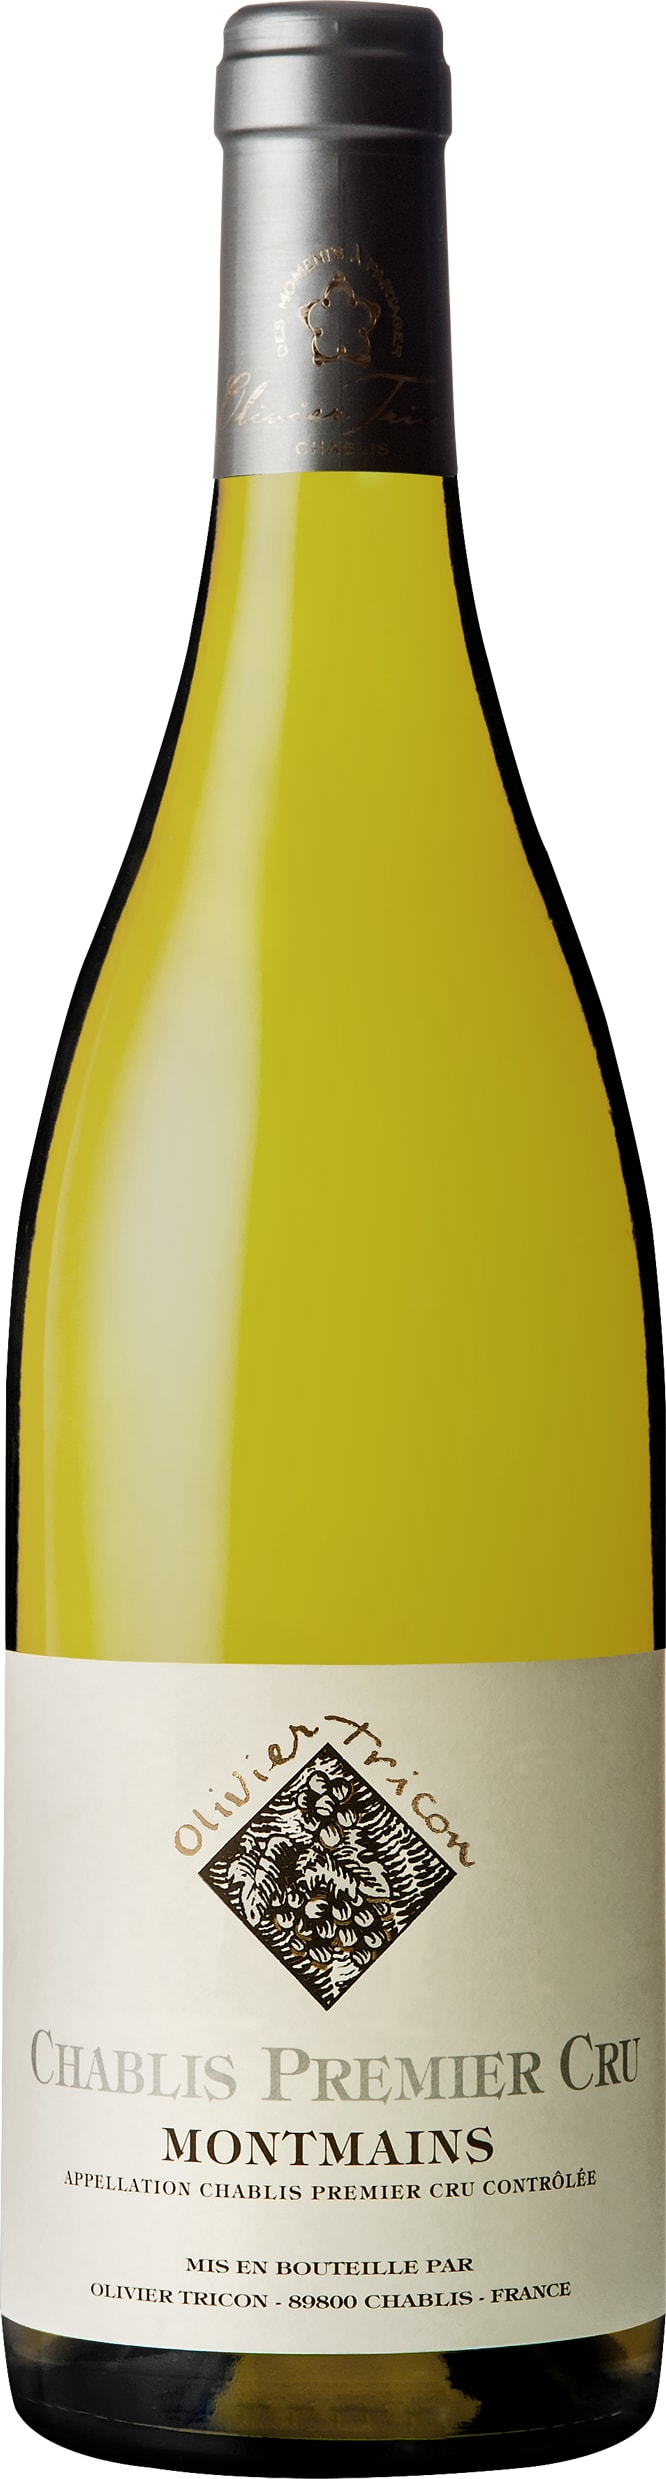 Chablis Premier Cru Montmains 18 Tricon 75cl - Buy Olivier Tricon Wines from GREAT WINES DIRECT wine shop